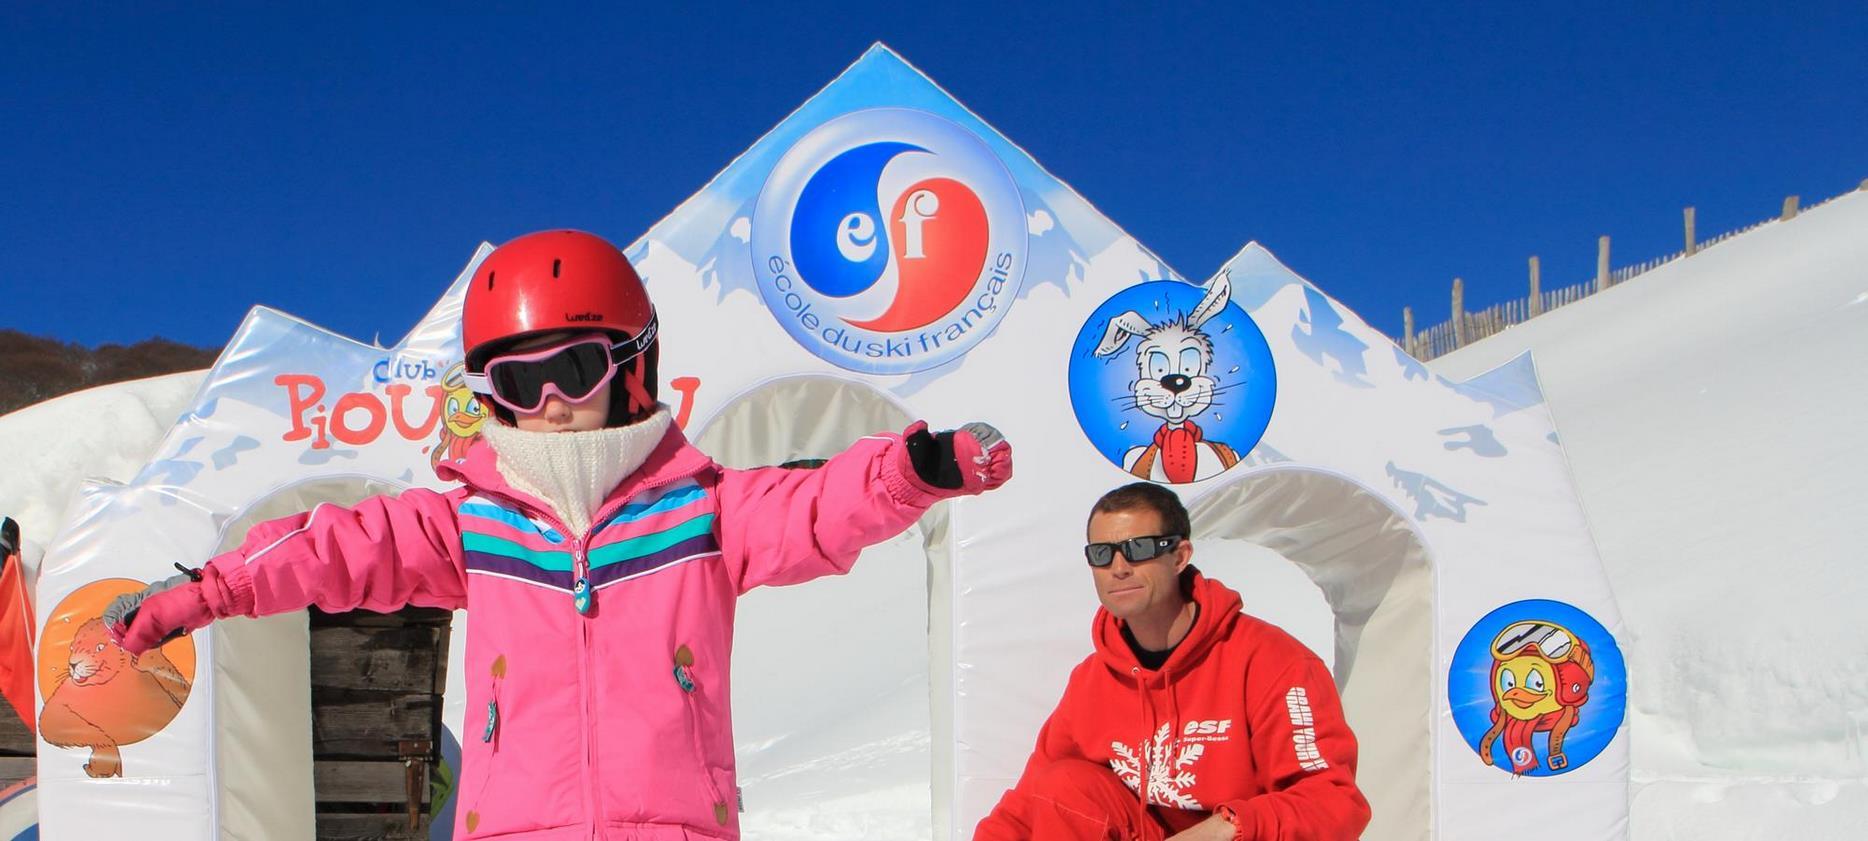 Super Besse - ski for the little ones at the Piou Piou club